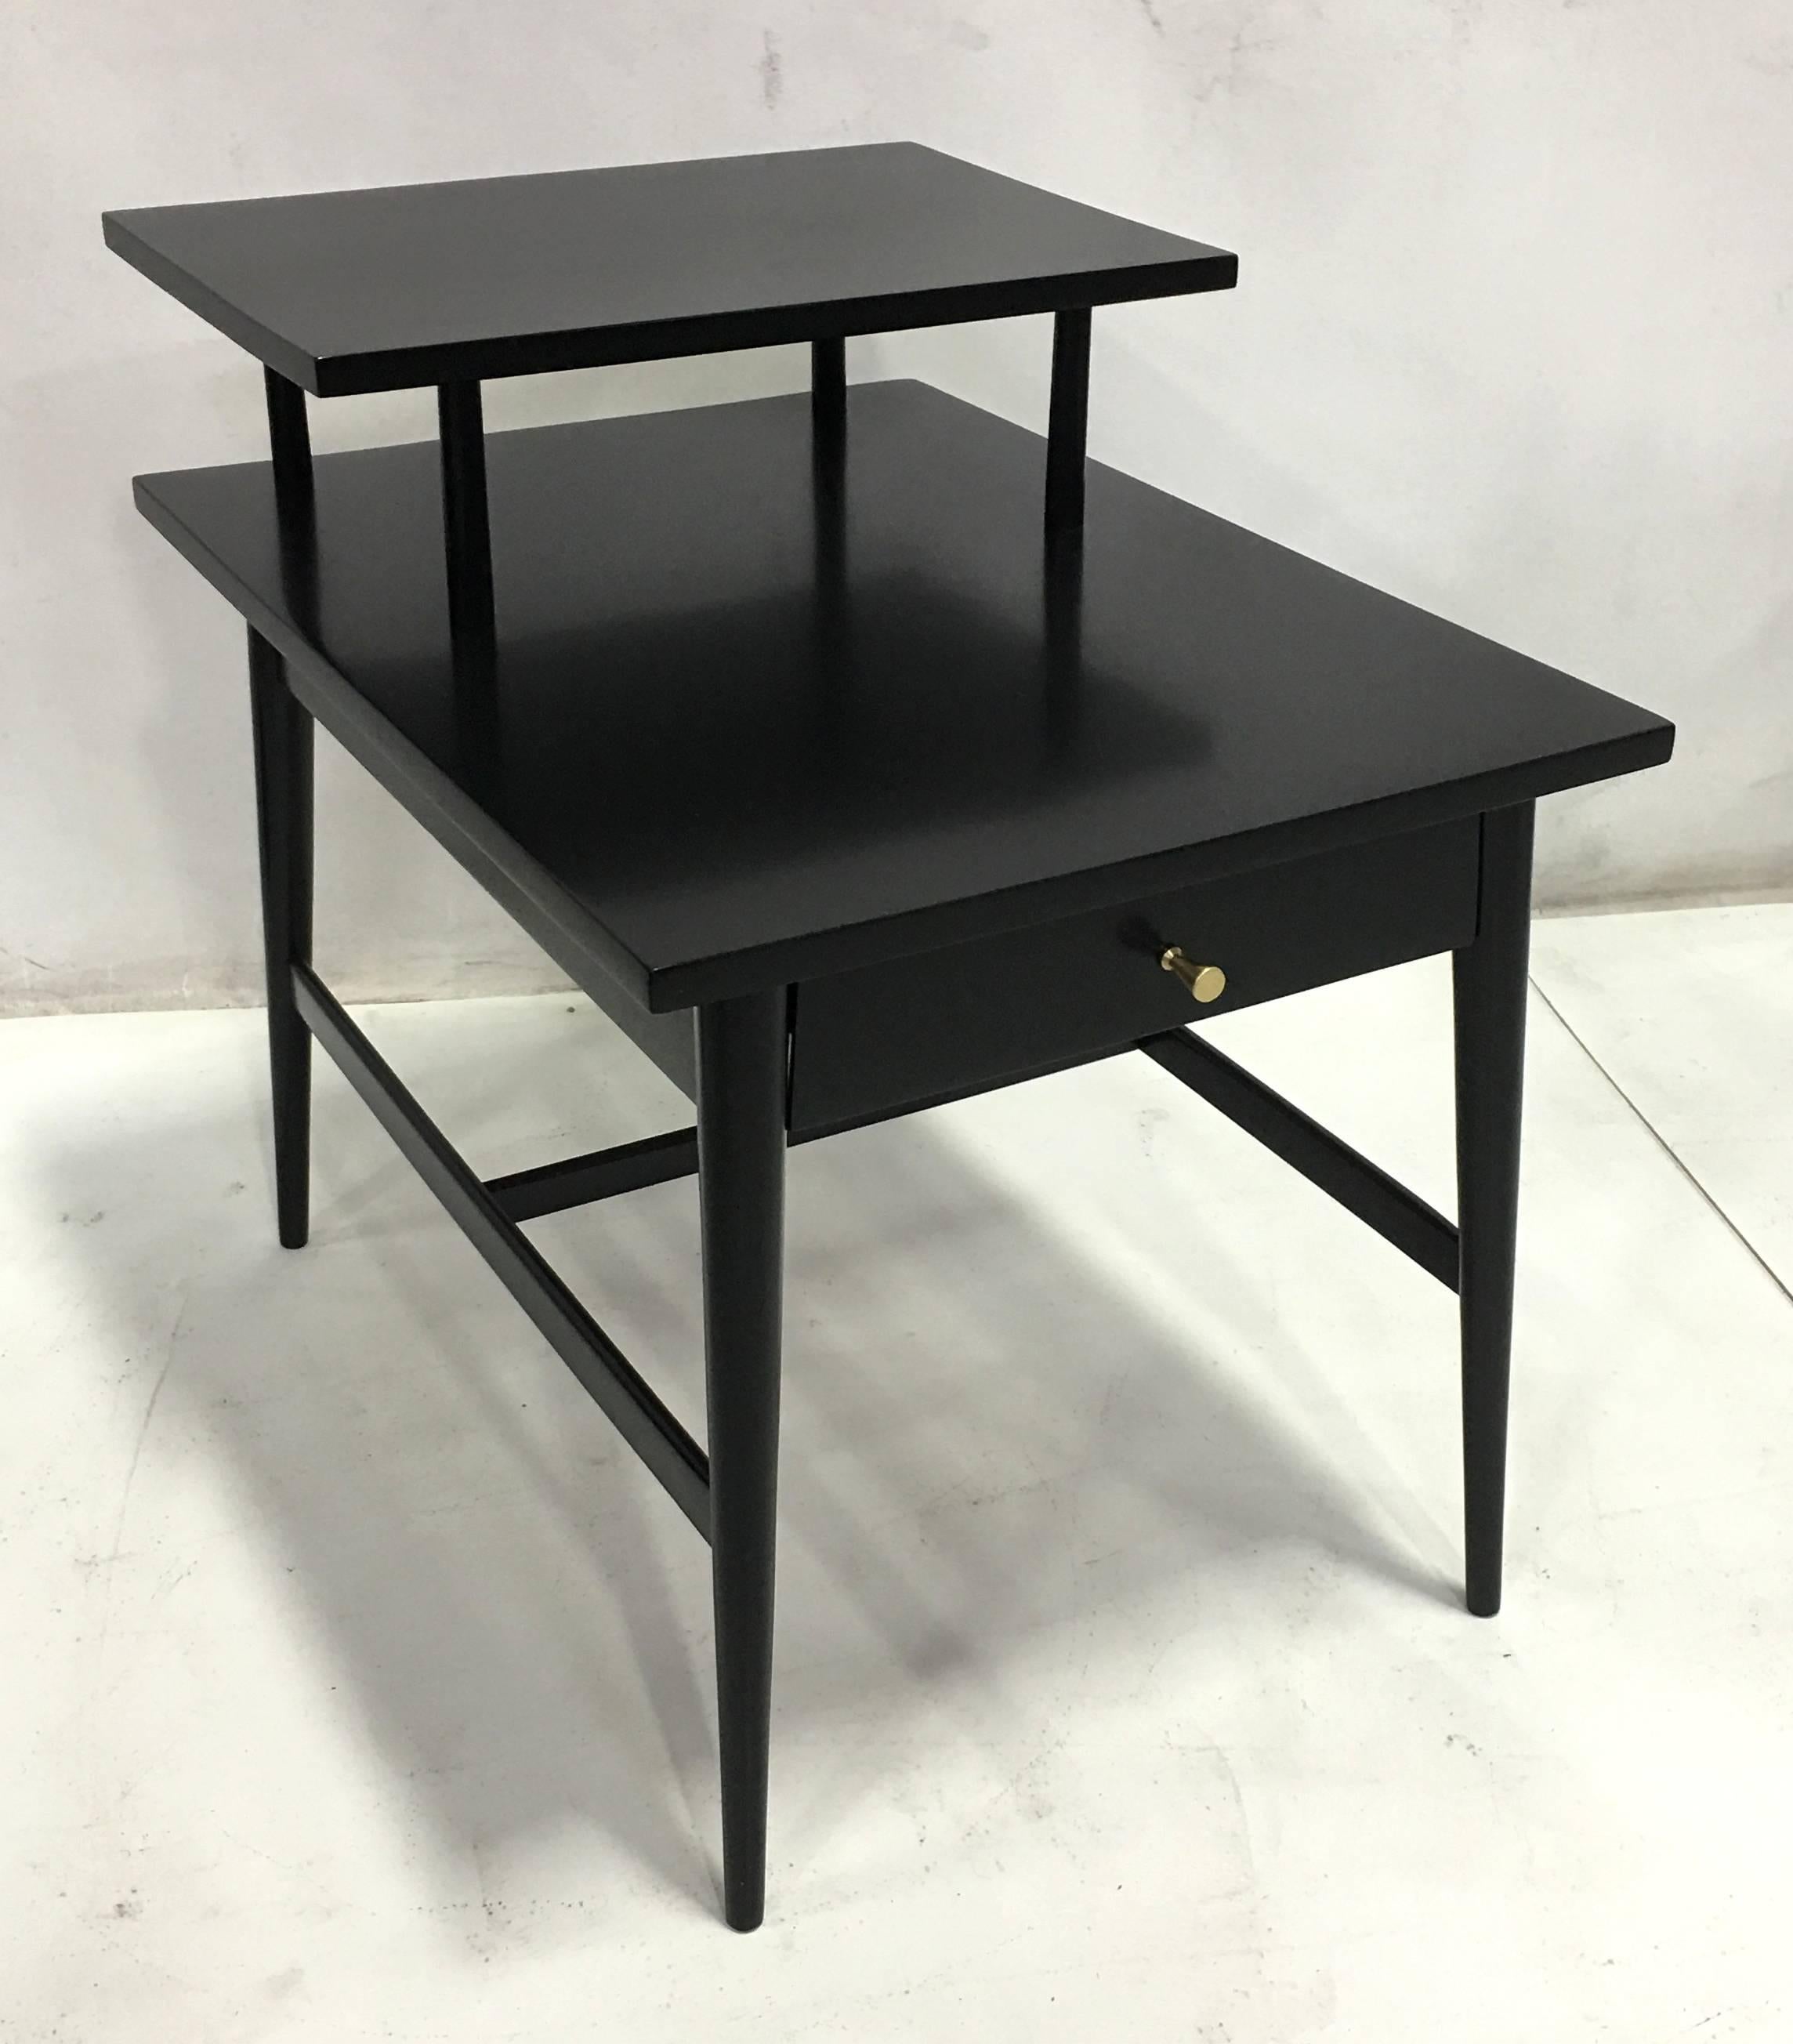 Handsome pair of Paul McCobb Planner Group nightstands or side tables painstakingly restored in black lacquer. The tables feature their original brass inverted cone pulls.  All work done with painstaking quality at our in-house workroom.  